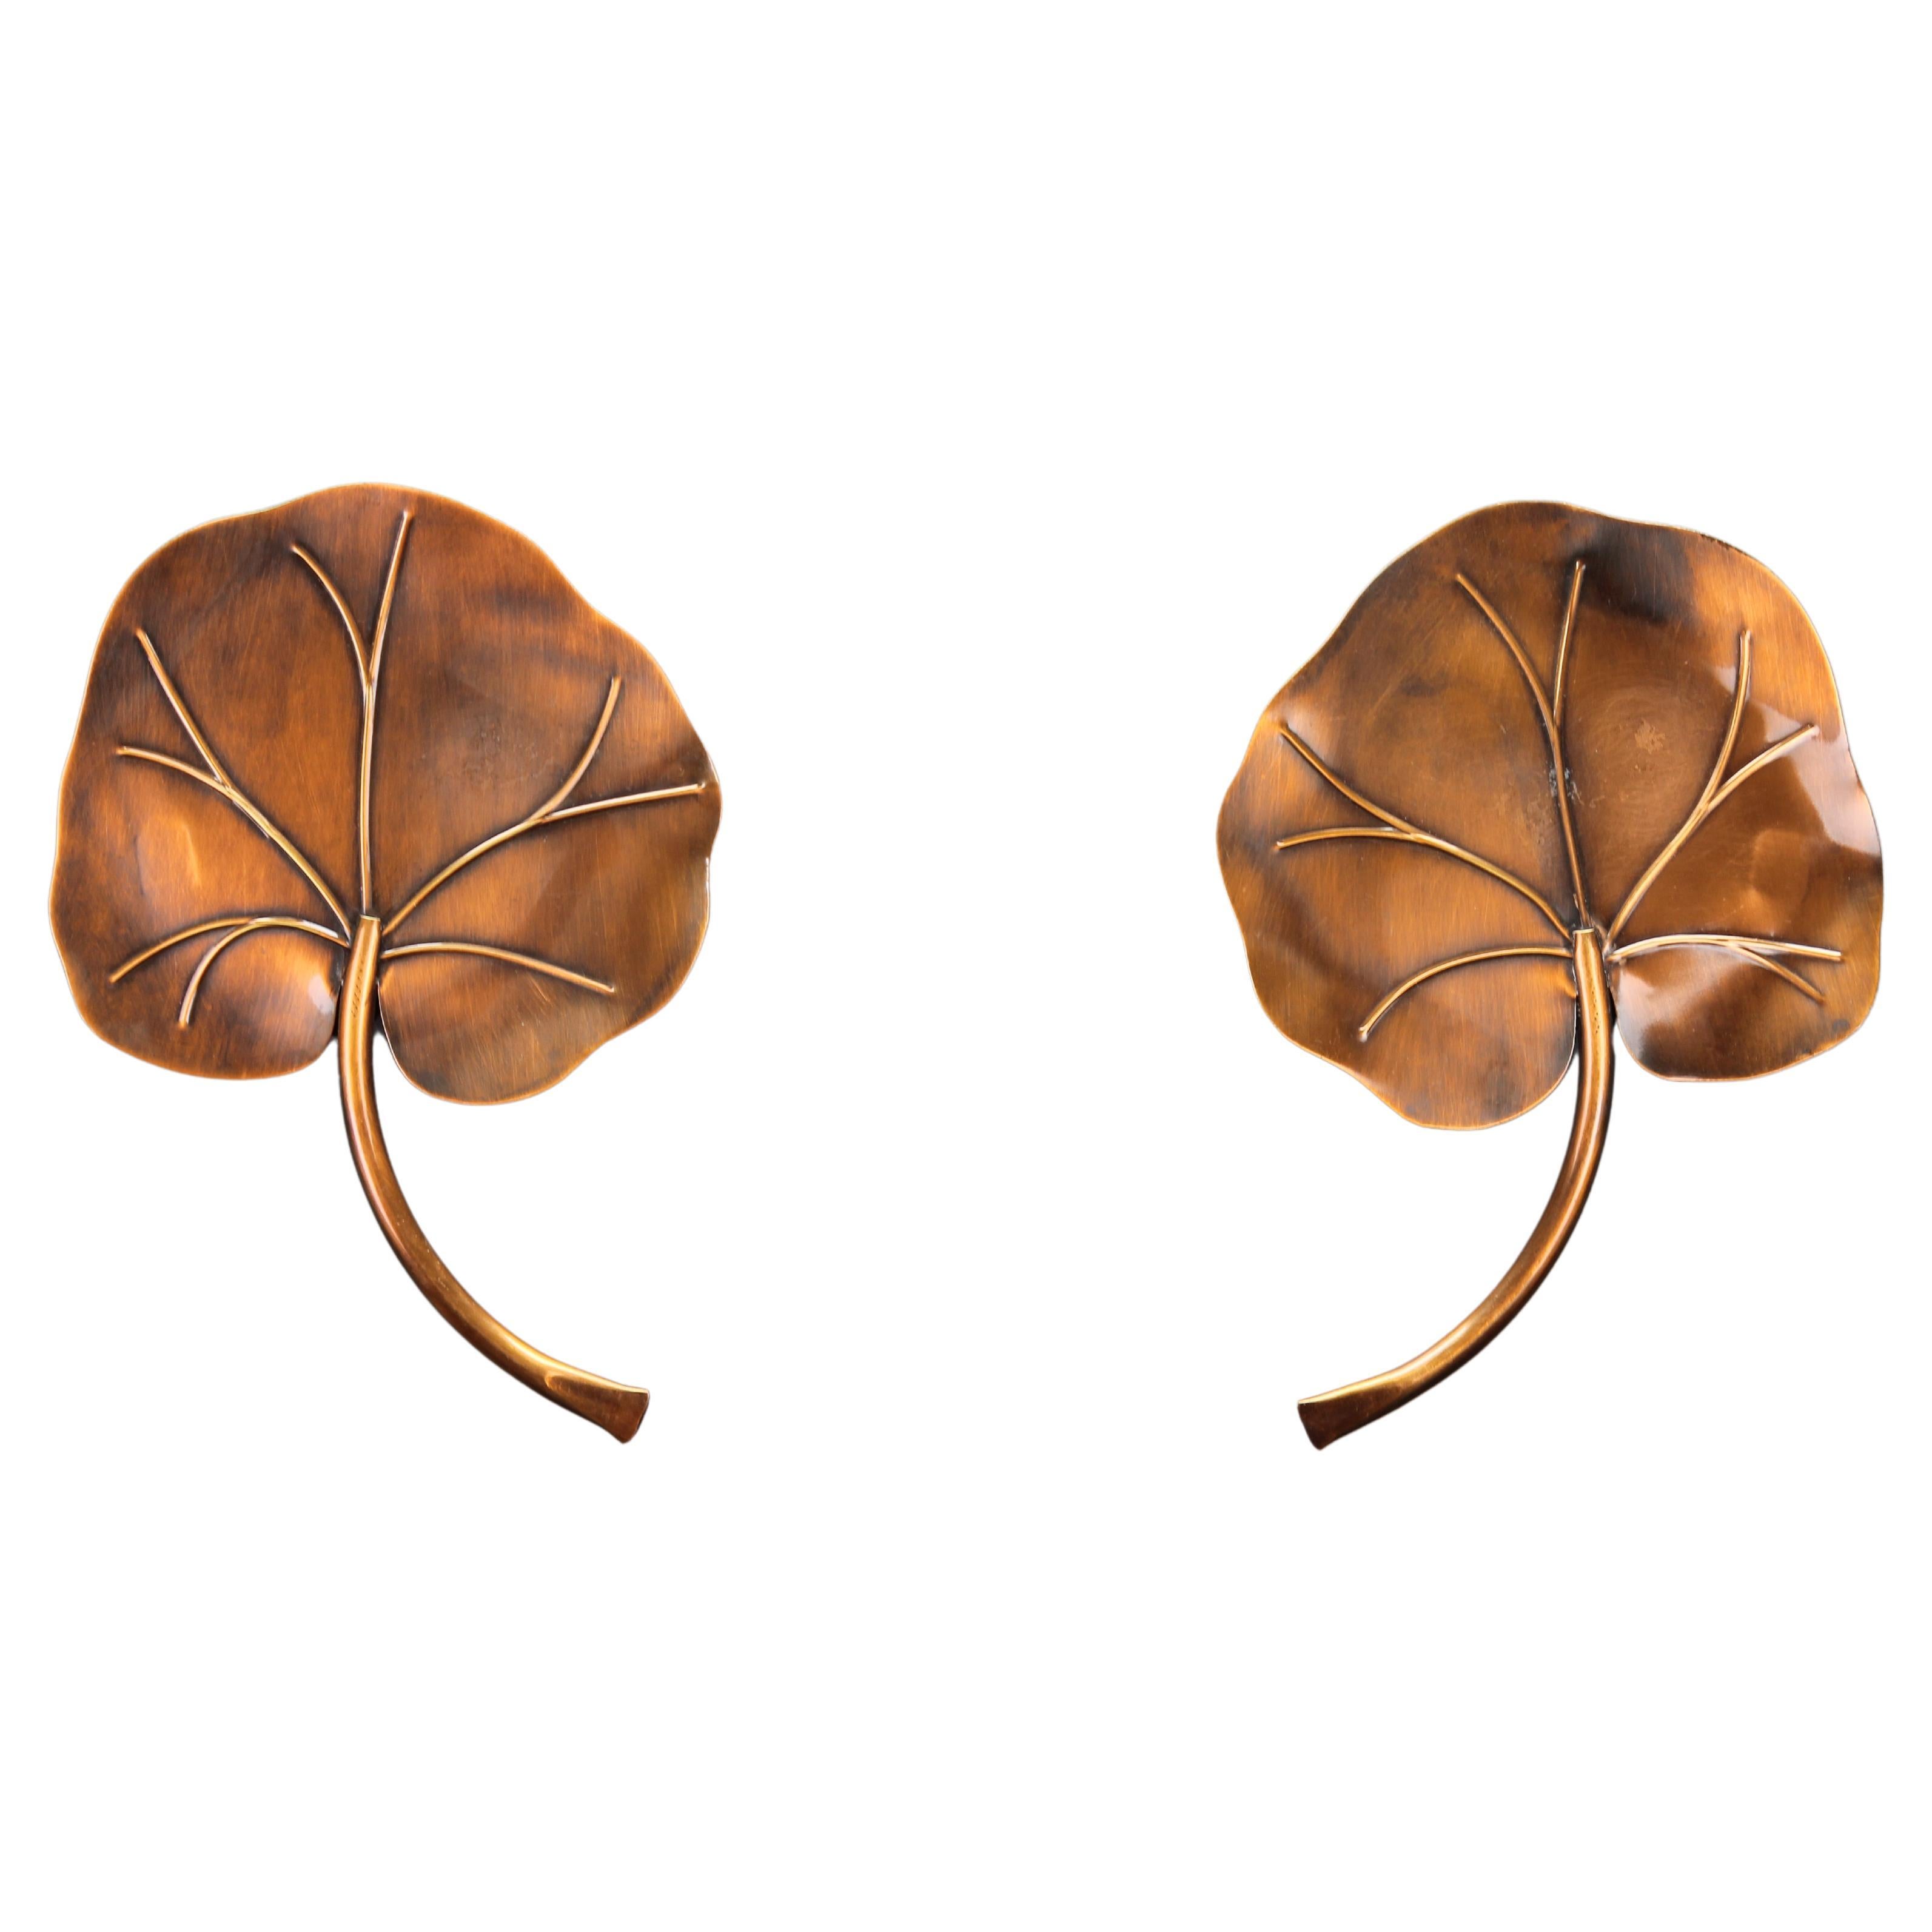 Pair of French Mid-Century Modern Brass Water Lily Leaf-Shaped Sconces For Sale